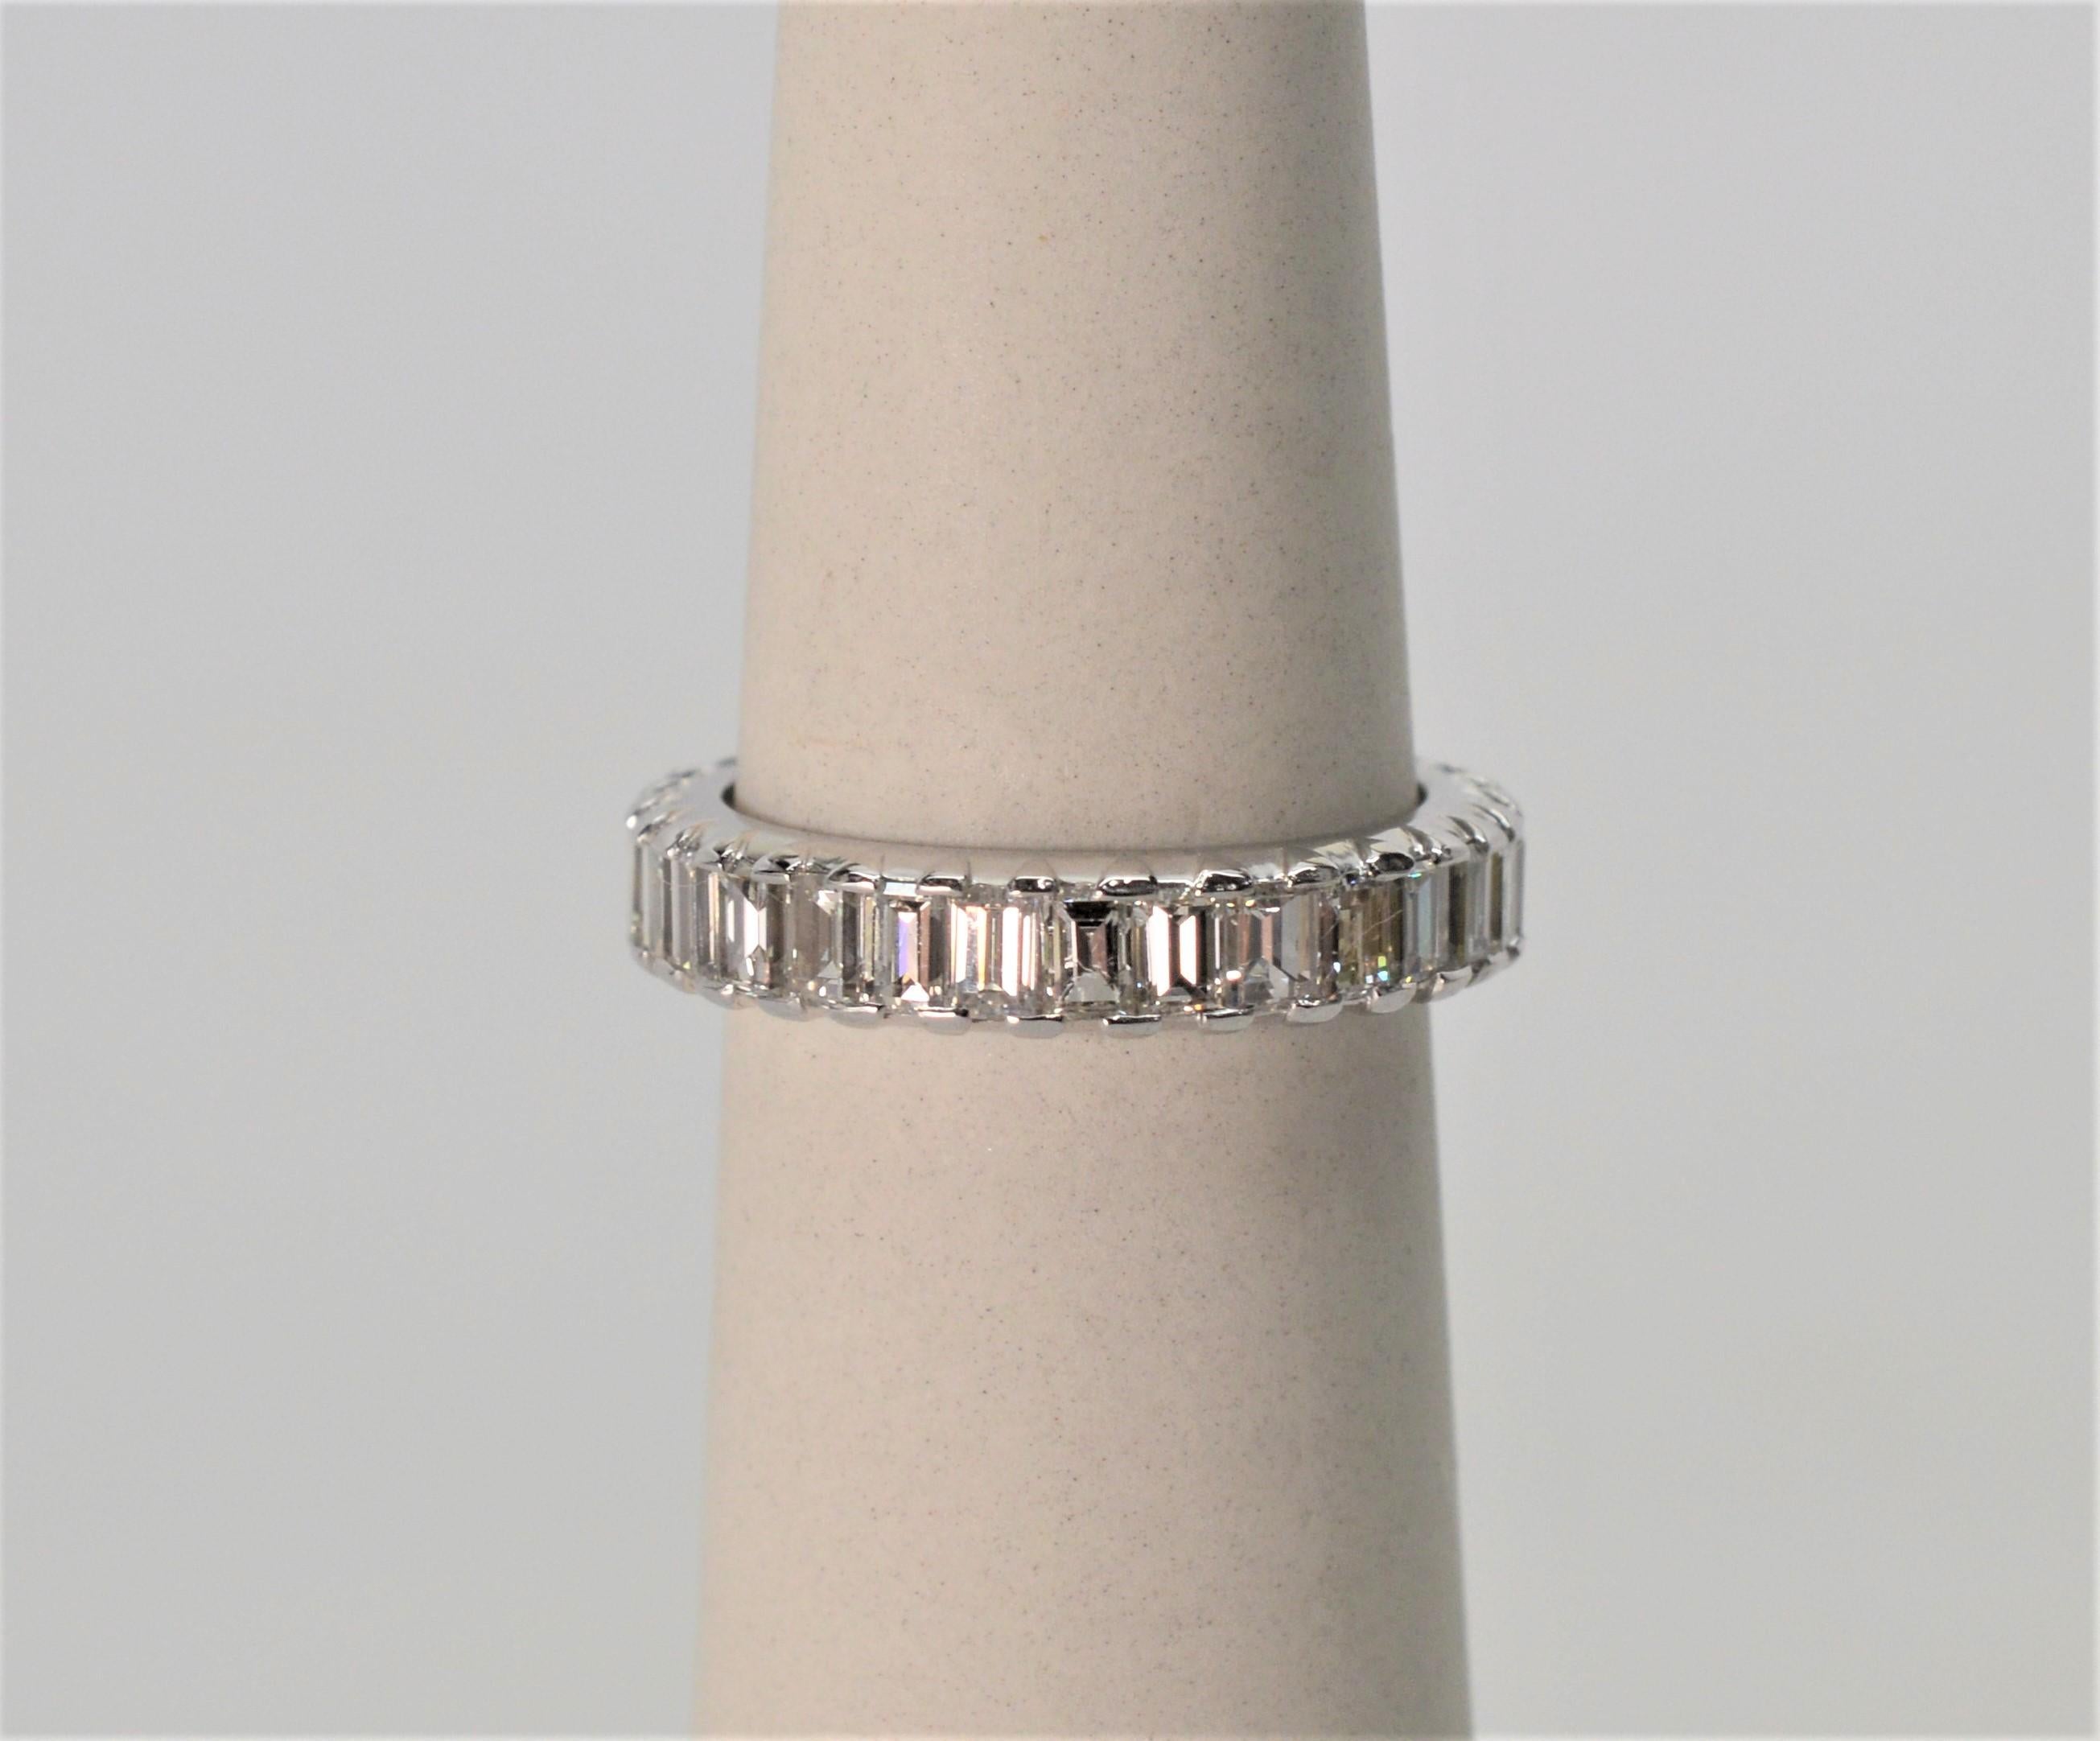 Antique Diamond and Platinum Eternity Ring. Size 6-3/4. Has thirty fine white G/VS .13 carat baguette diamonds for a total weight of 3.90 carats. 
In gift bag.